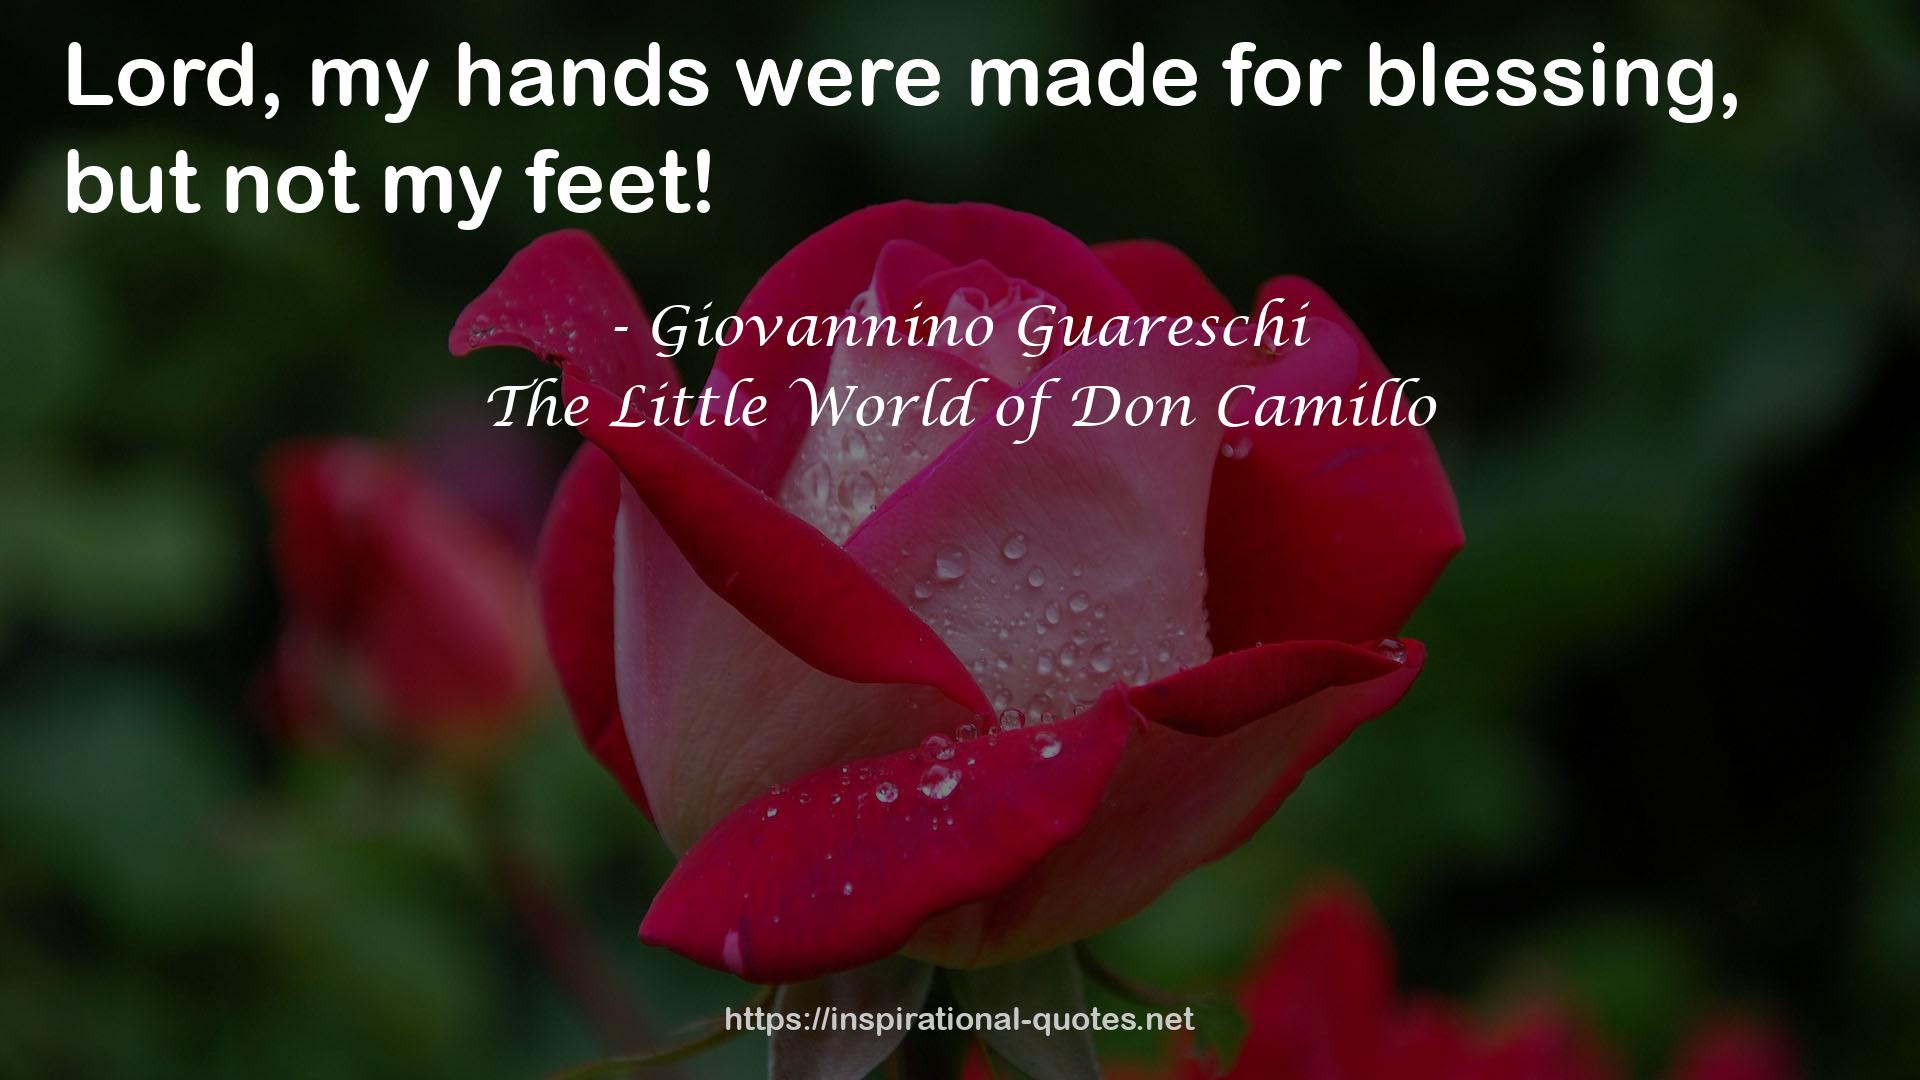 The Little World of Don Camillo QUOTES